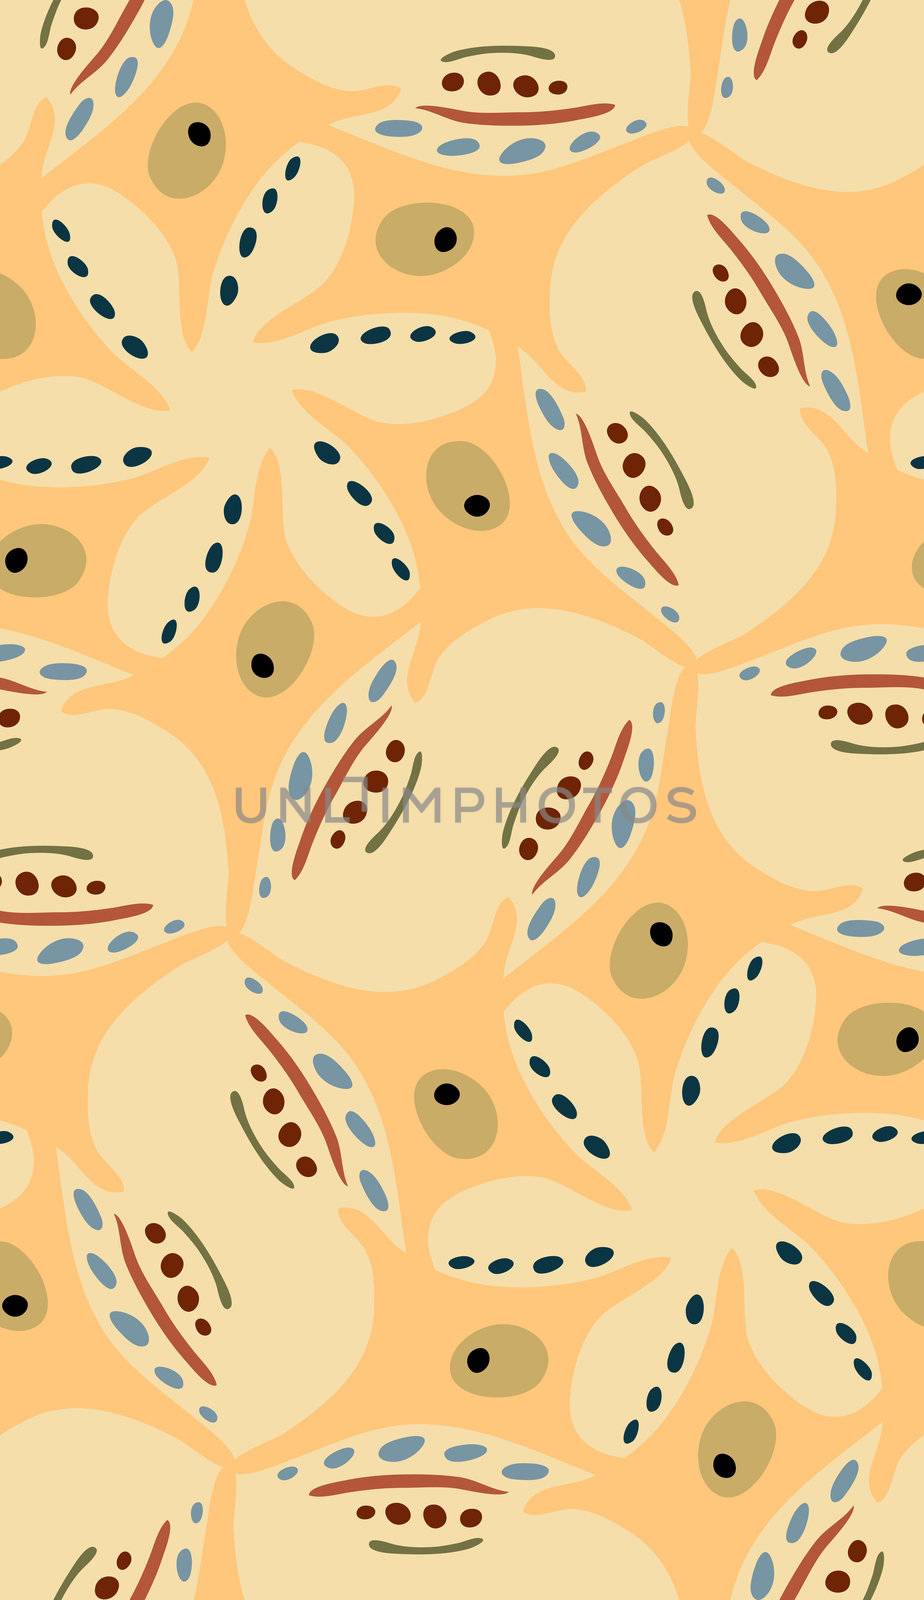 Seamless wallpaper background pattern of leaf and cell shapes